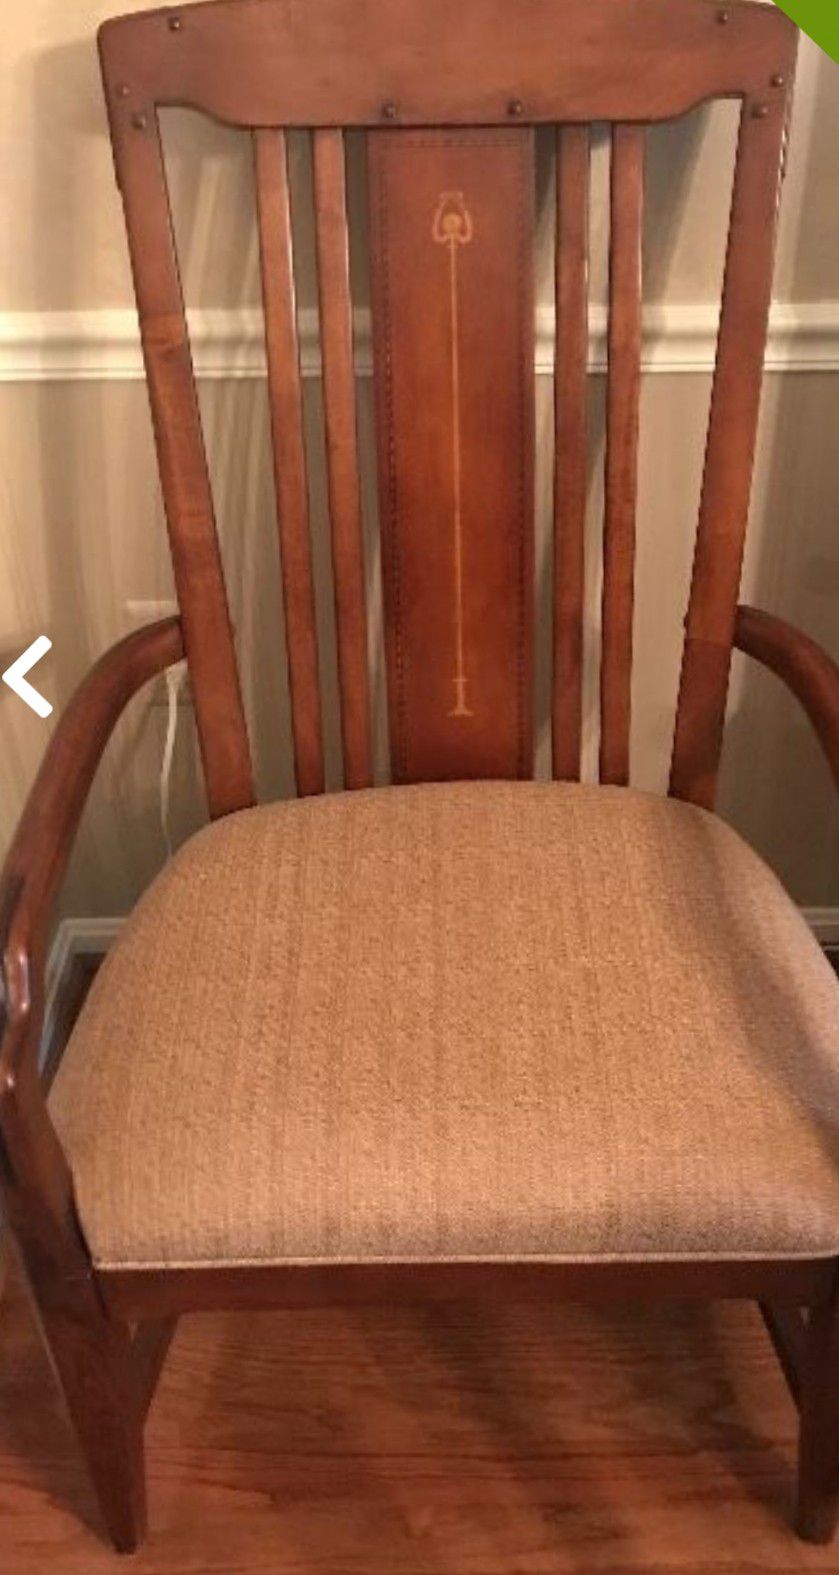 Pennsylvania house dinning table with 6 chairs